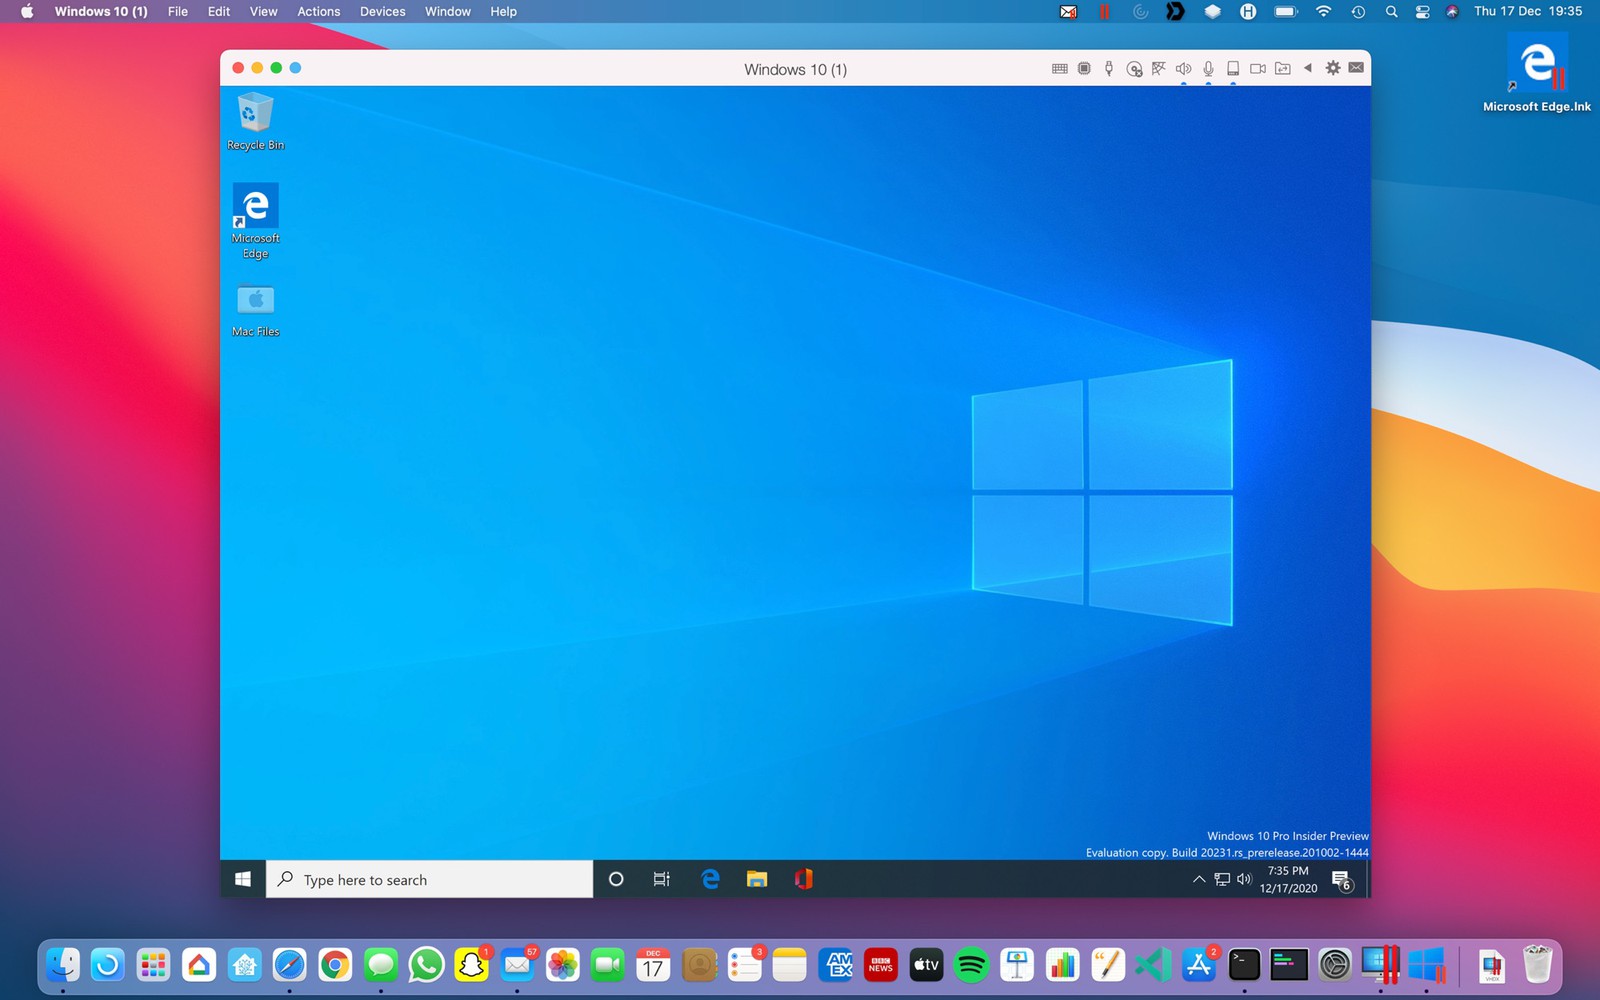 Parallels、｢Parallels Desktop for Mac｣のApple Silicon対応版のテクニカルプレビューを公開